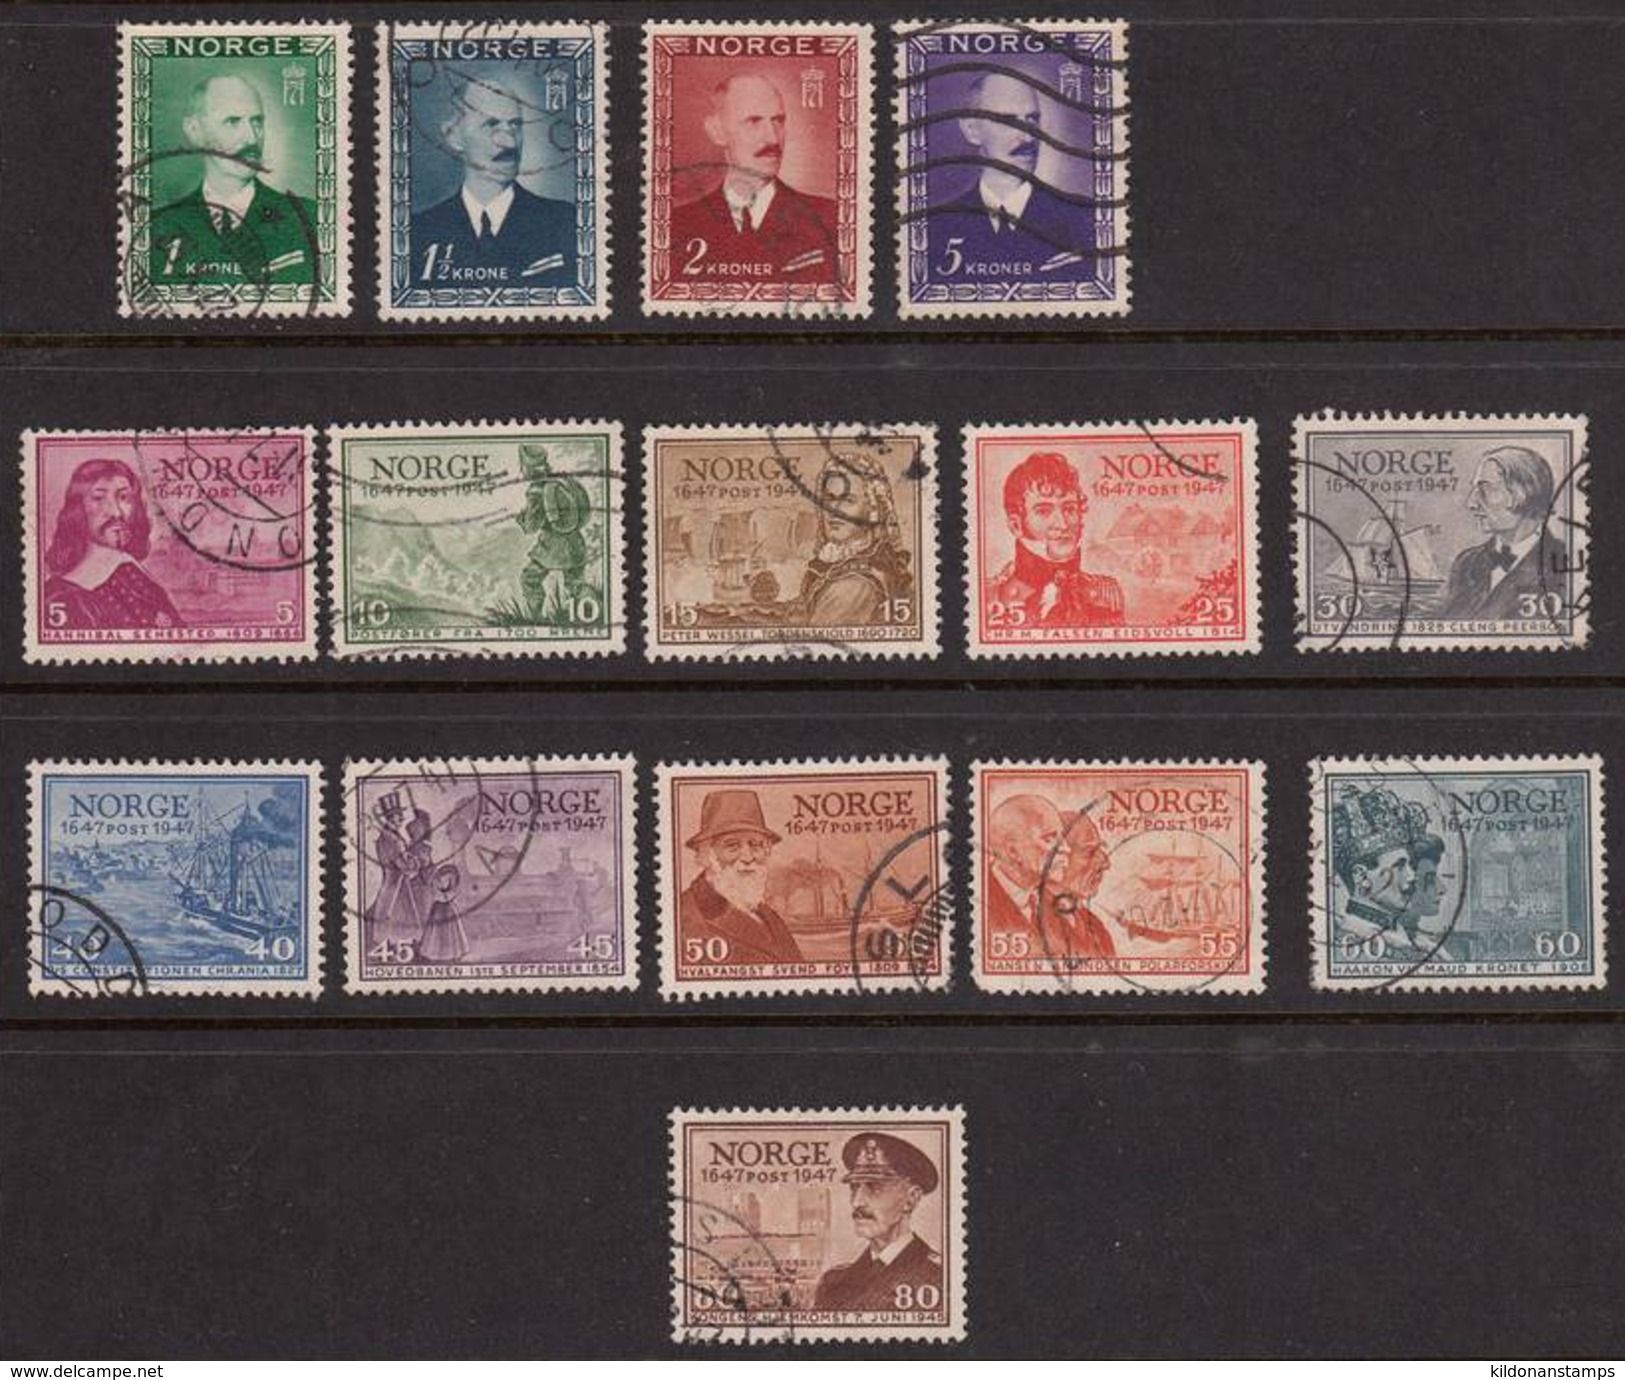 Norway 1946-47 Full Sets, Cancelled, Sc 275-278, 279-289 - Gebraucht